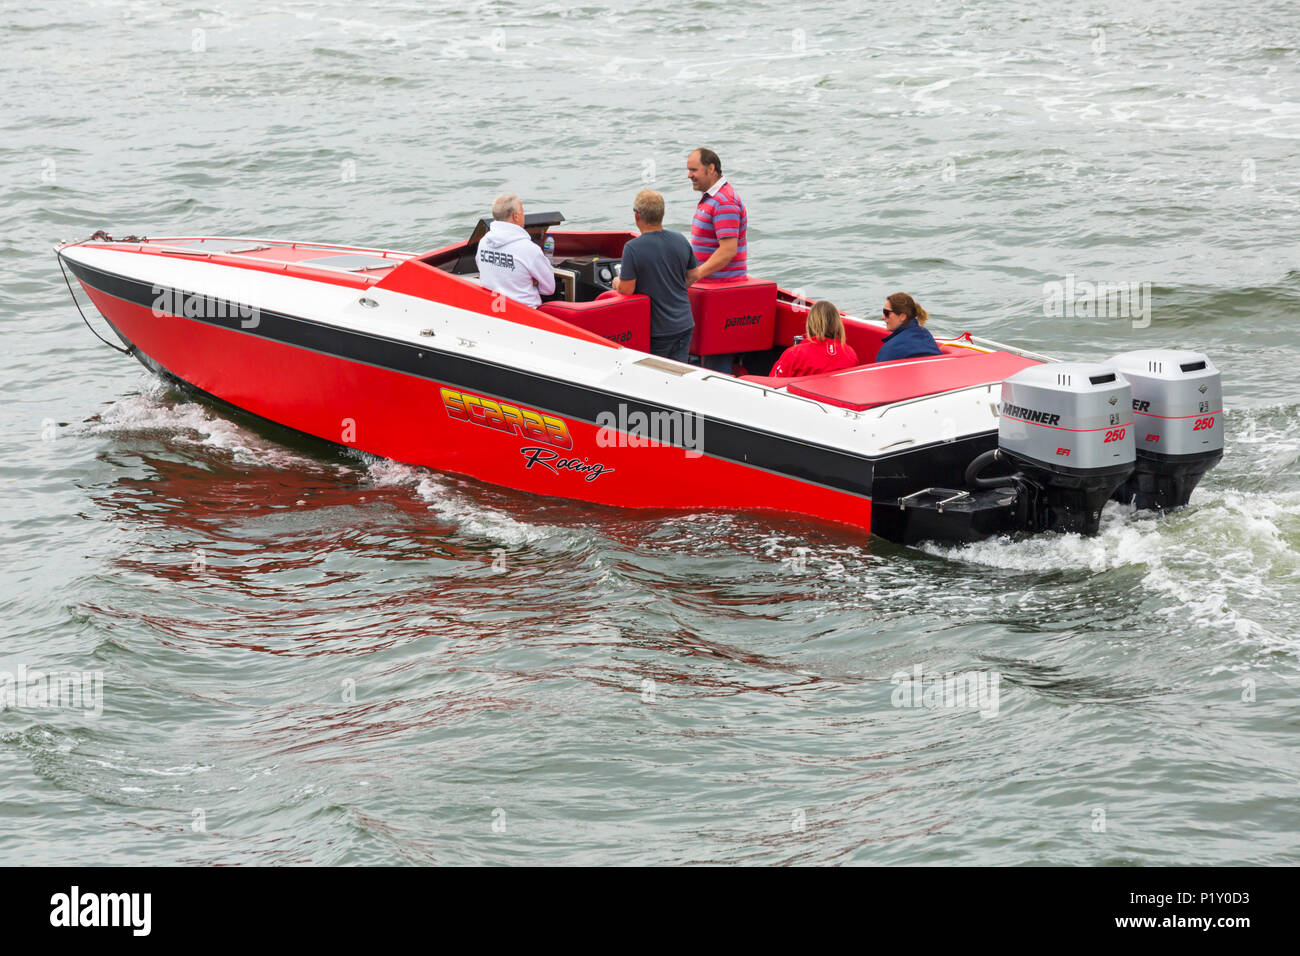 Scarab Panther Racing boat at Poole Harbour, Poole, Dorset, England UK in June Stock Photo